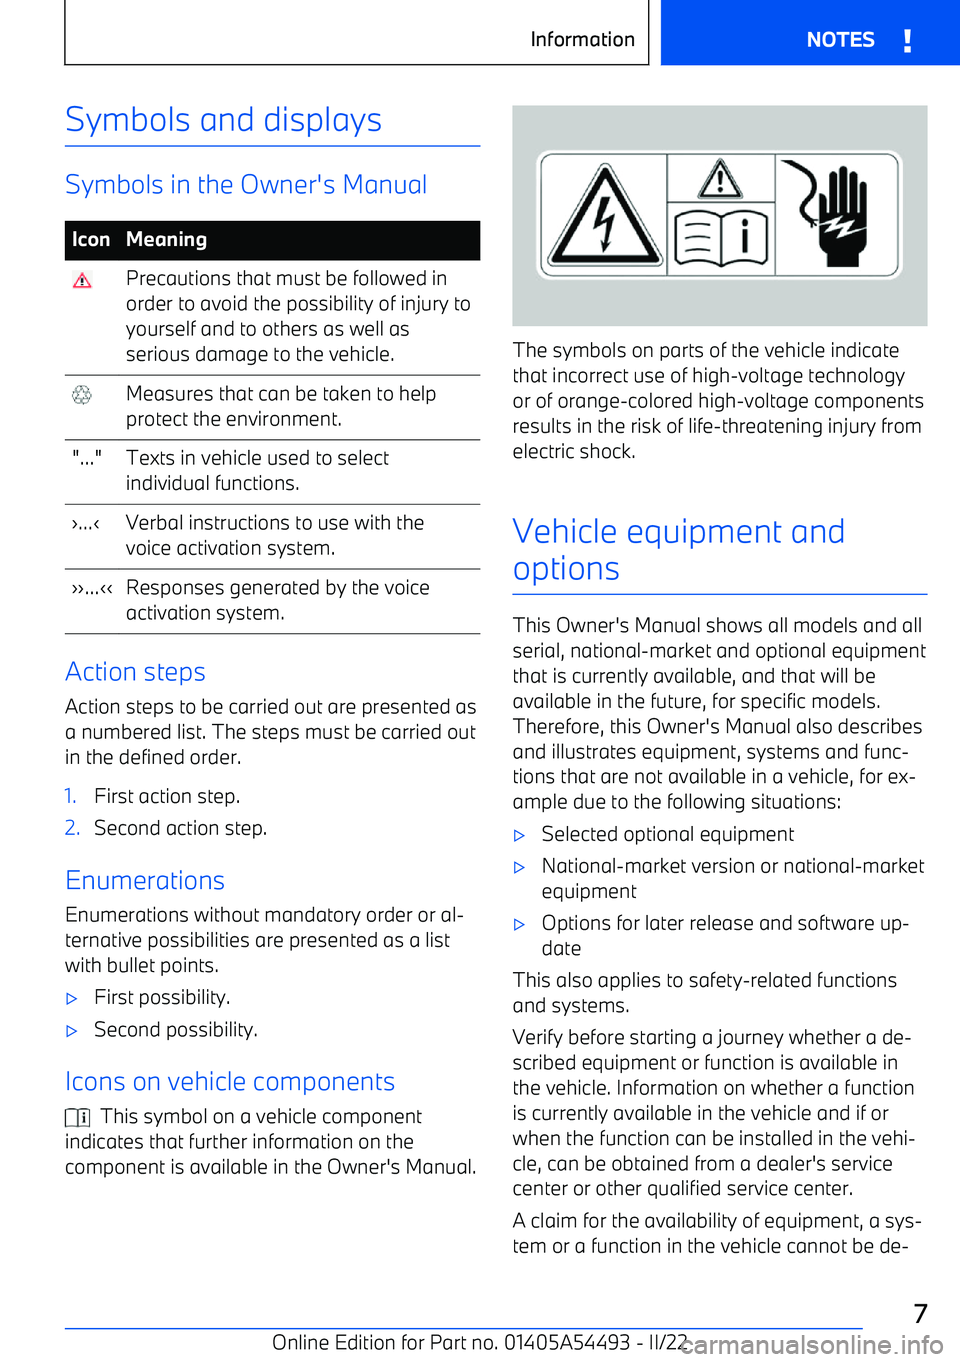 BMW IX 2022  Owners Manual Symbols and displays
Symbols in the Owner